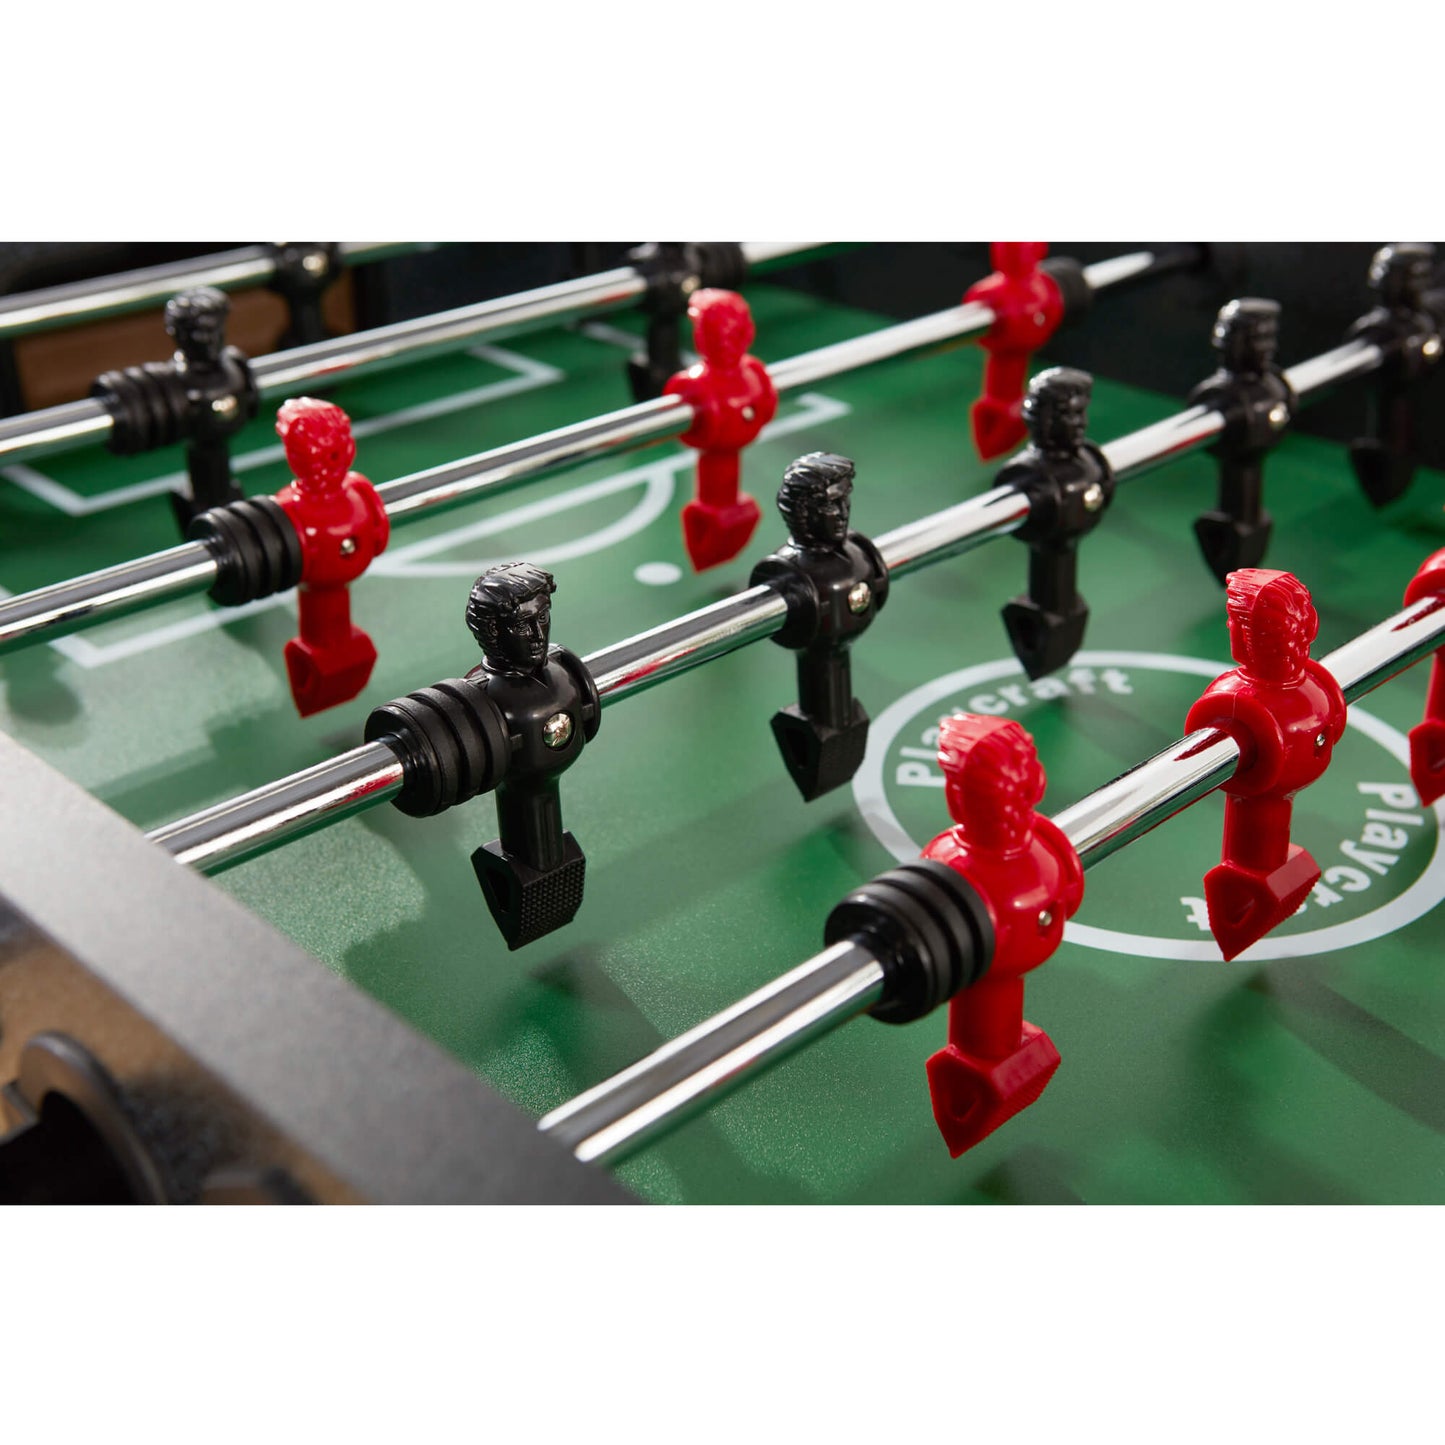 Playcraft Pitch Foosball Table Charcoal Finish - Gaming Blaze